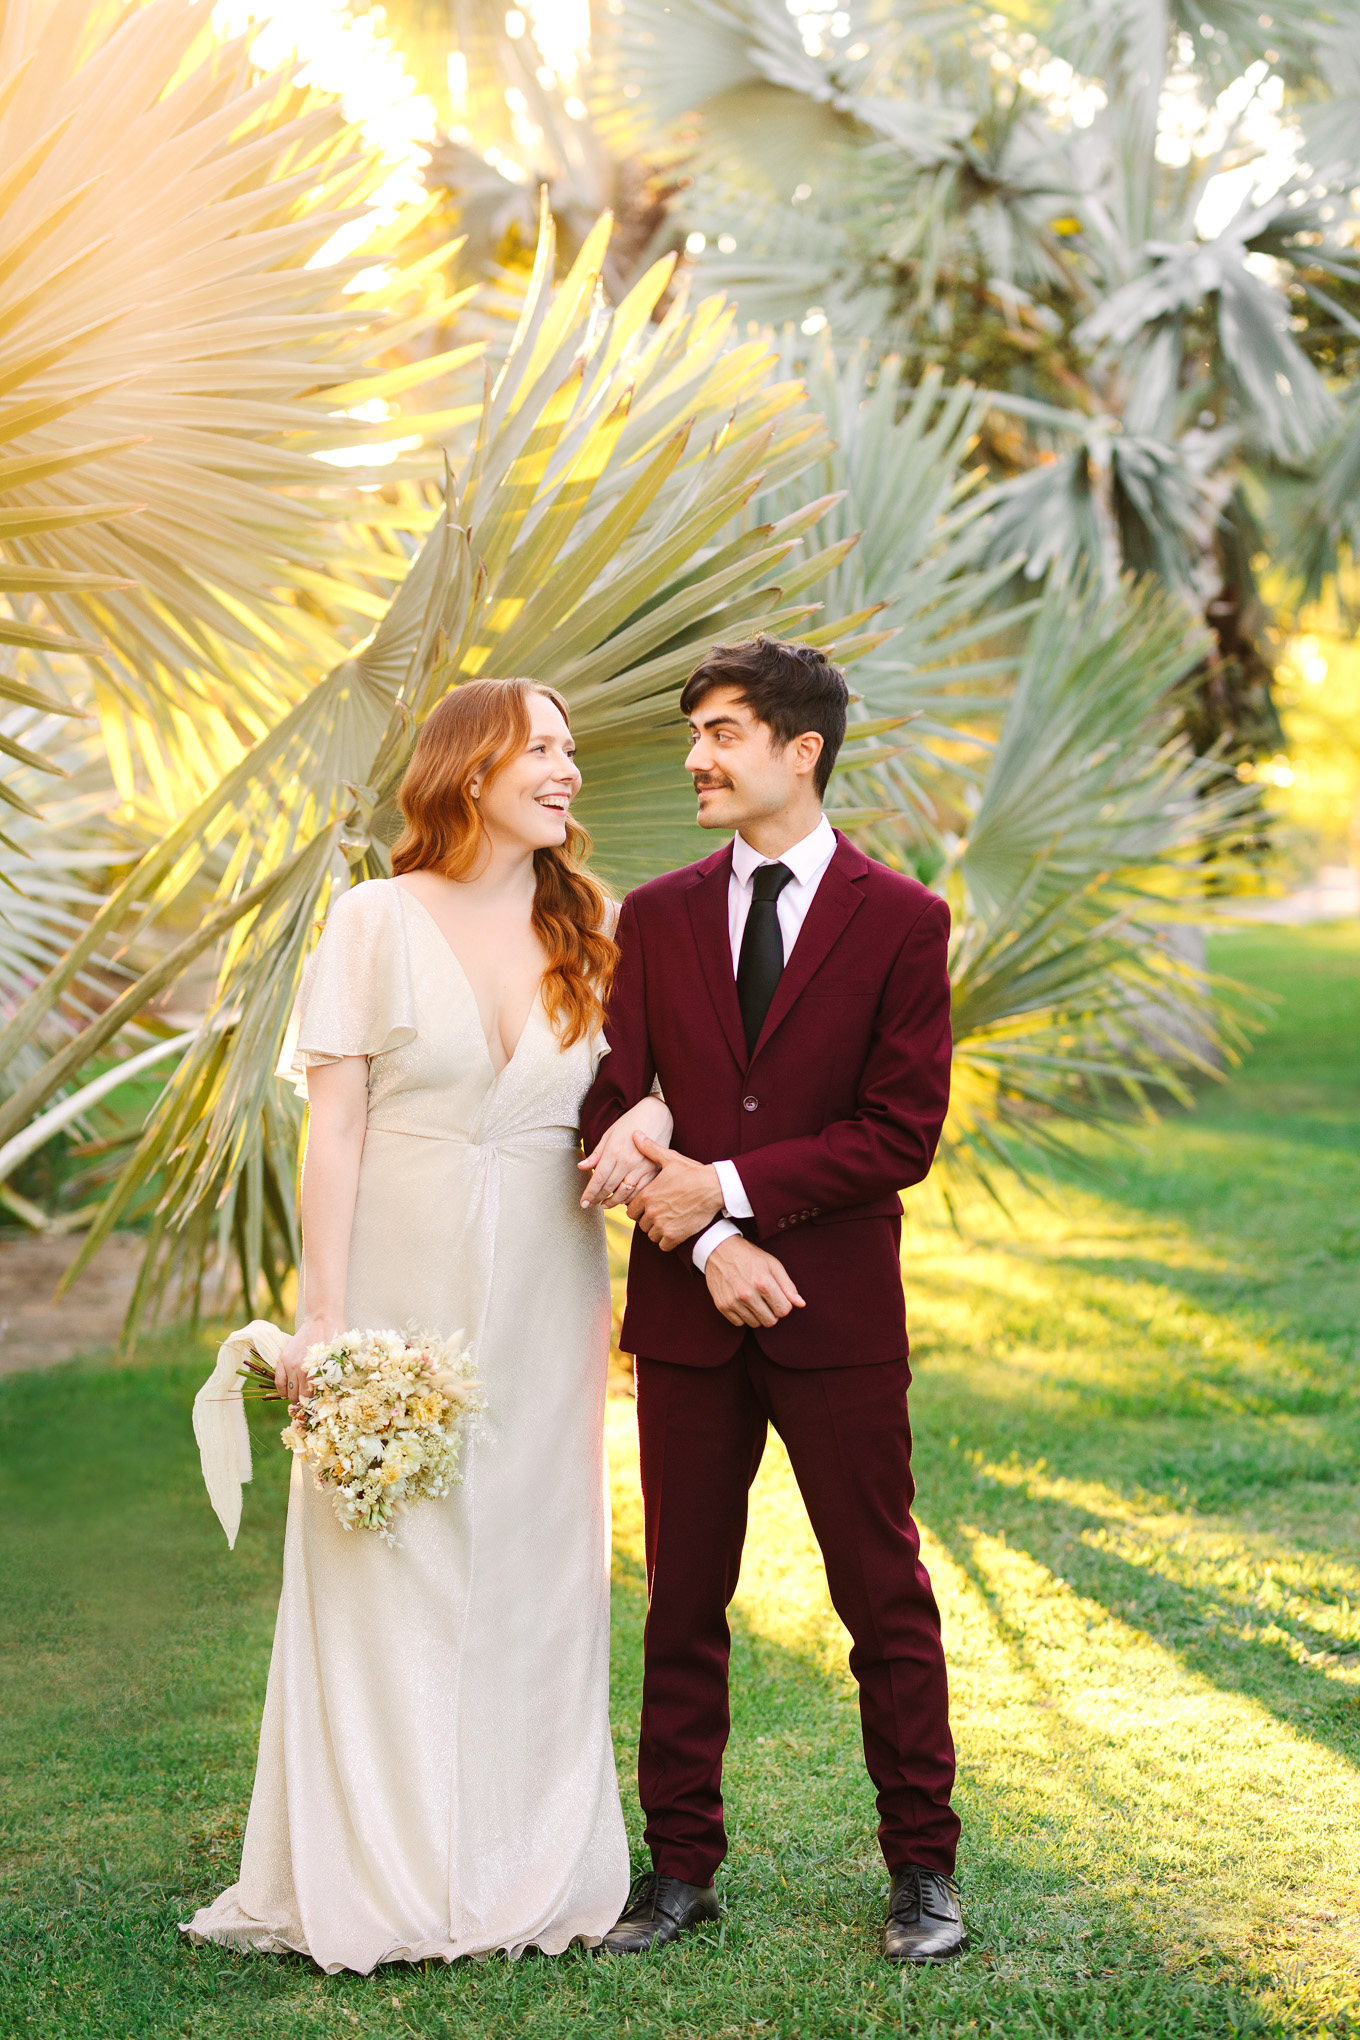 Bride and groom at LA Arboretum | Best Southern California Garden Wedding Venues | Colorful and elevated wedding photography for fun-loving couples | #gardenvenue #weddingvenue #socalweddingvenue #bouquetideas #uniquebouquet   Source: Mary Costa Photography | Los Angeles 